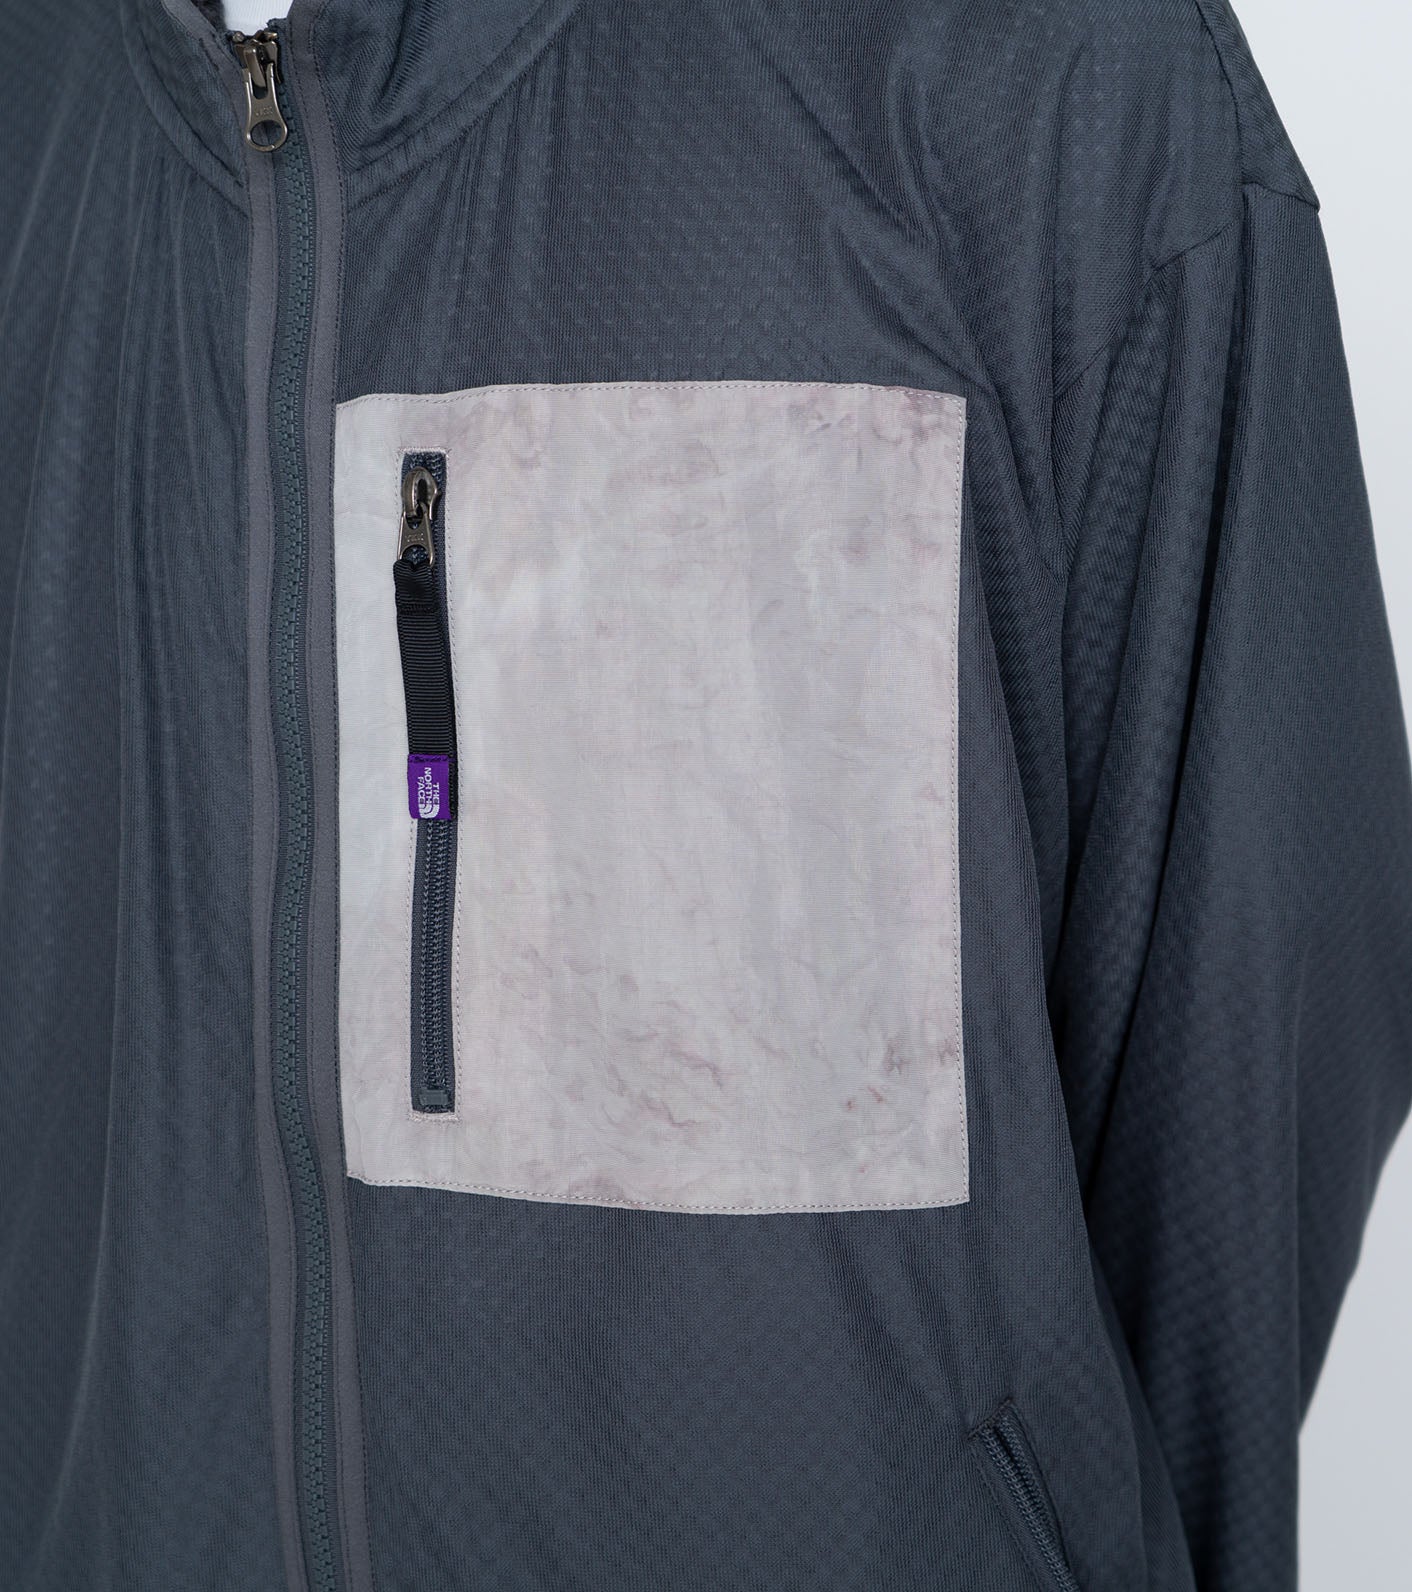 THE NORTH FACE PURPLE LABEL Field Zip Up Jacket